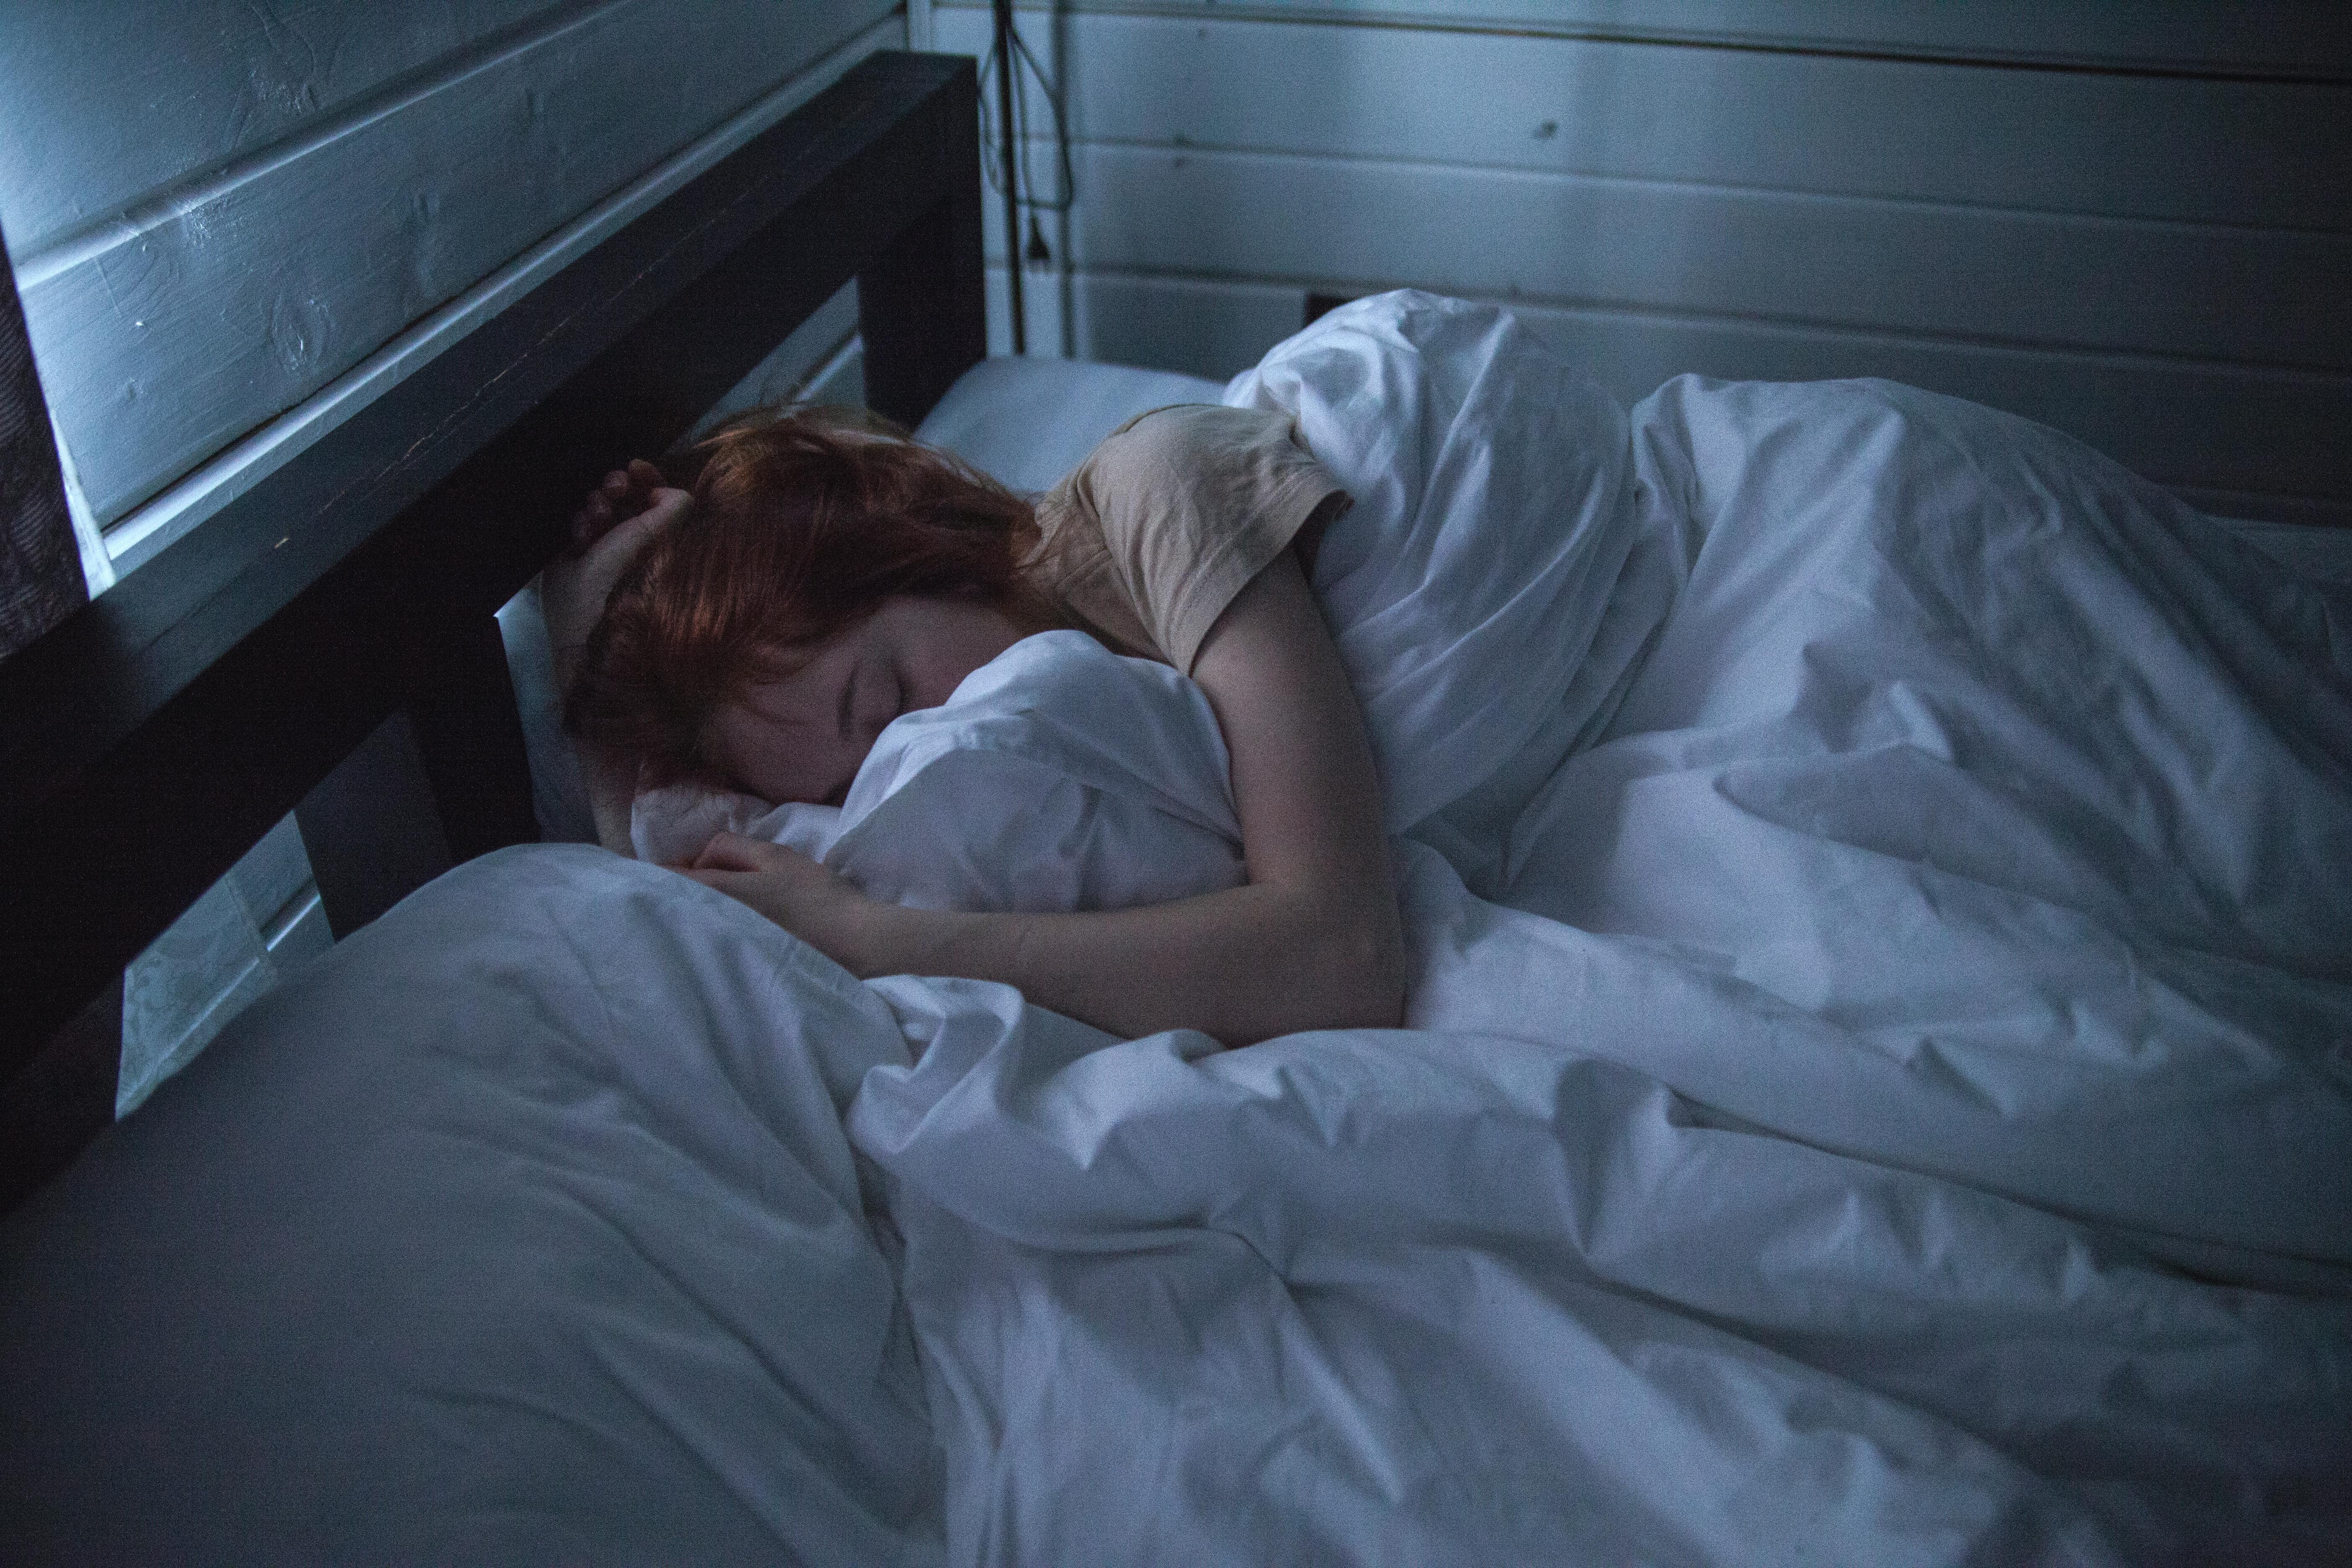 Sleep researchers have discovered it: that's why we wake up most often between 2 and 3 a.m